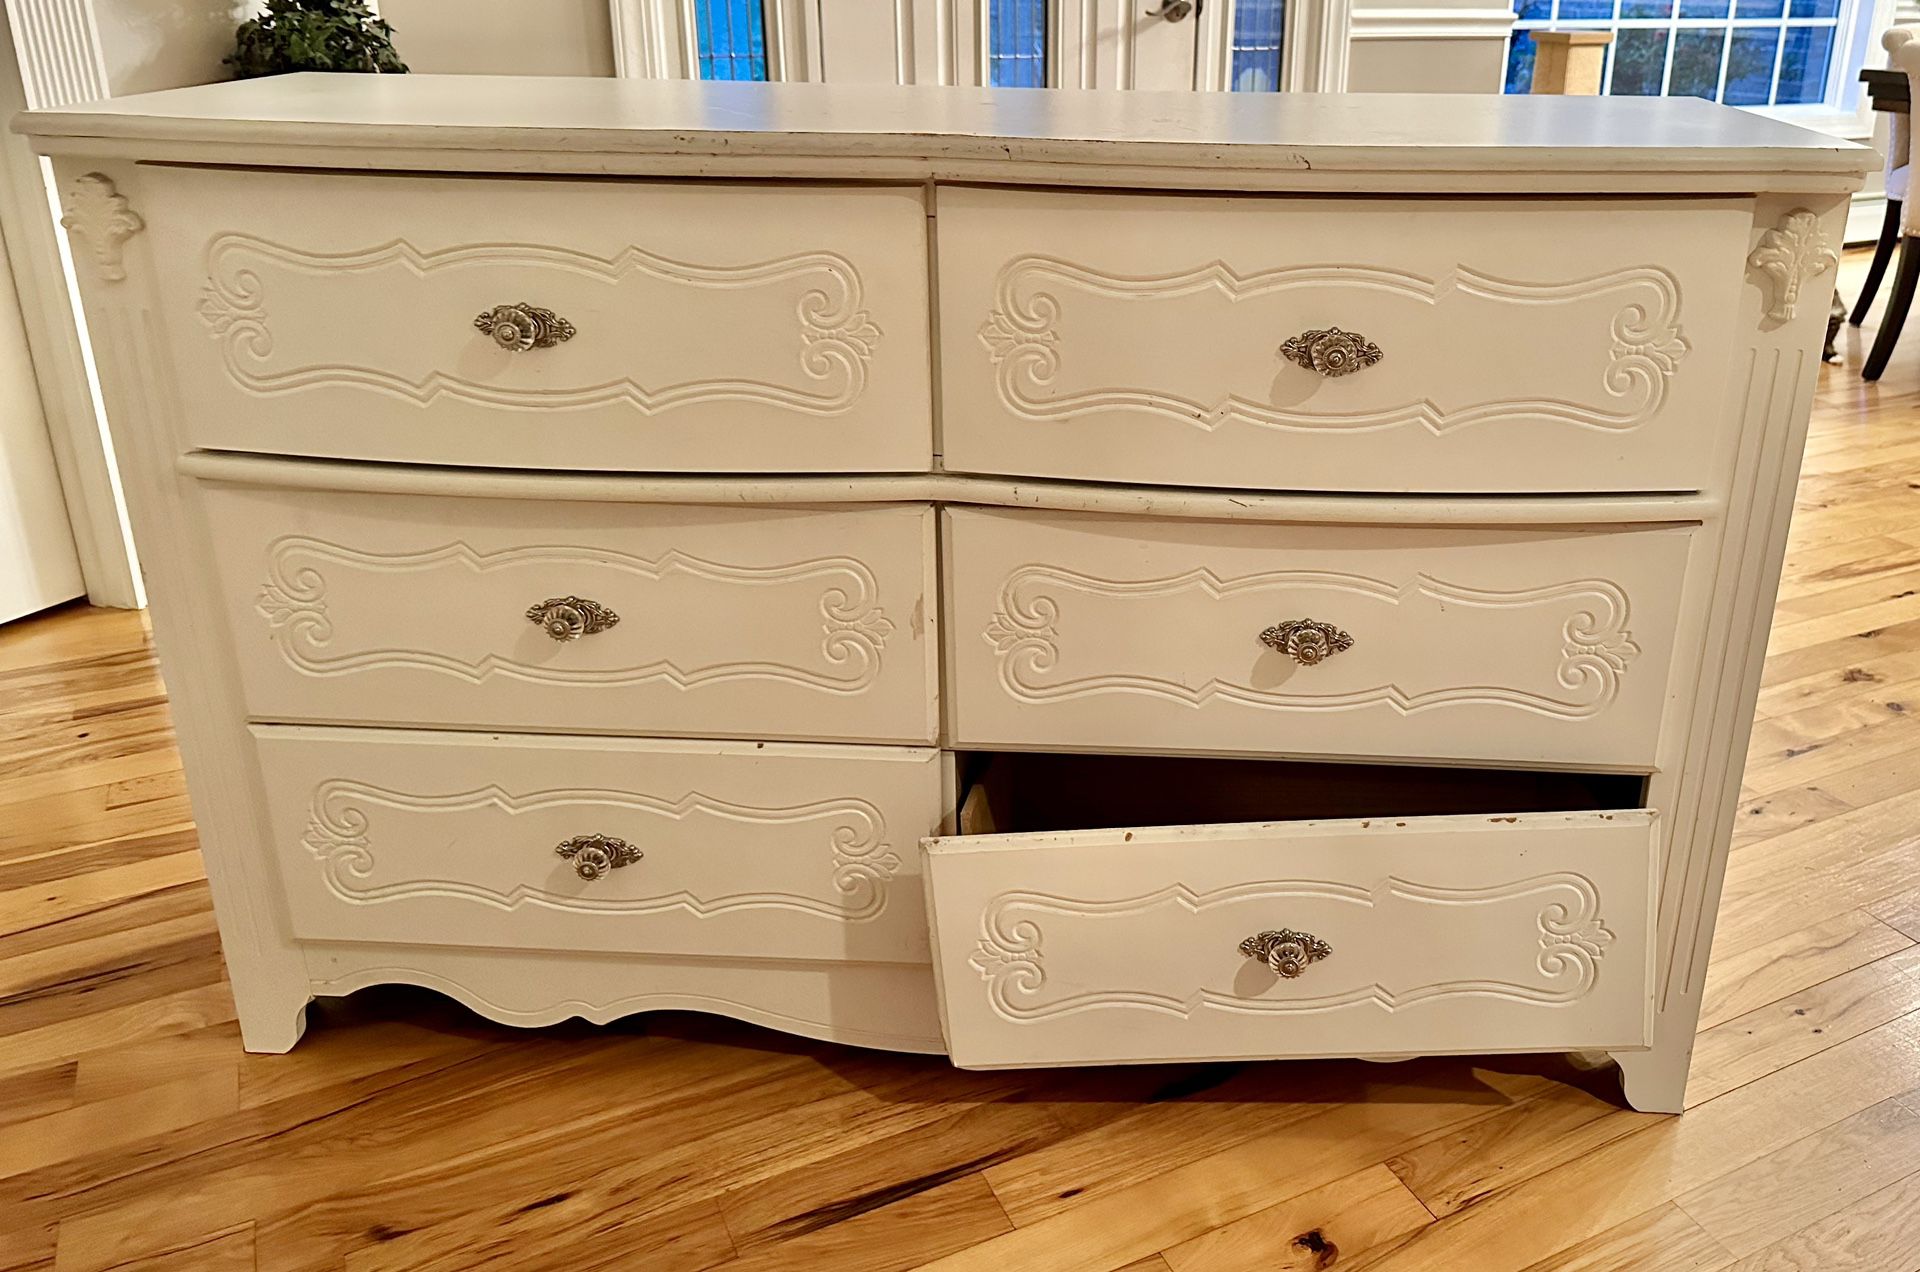 Ashley Brand Dresser/ Mirror  Color Is White Great Project Dresser